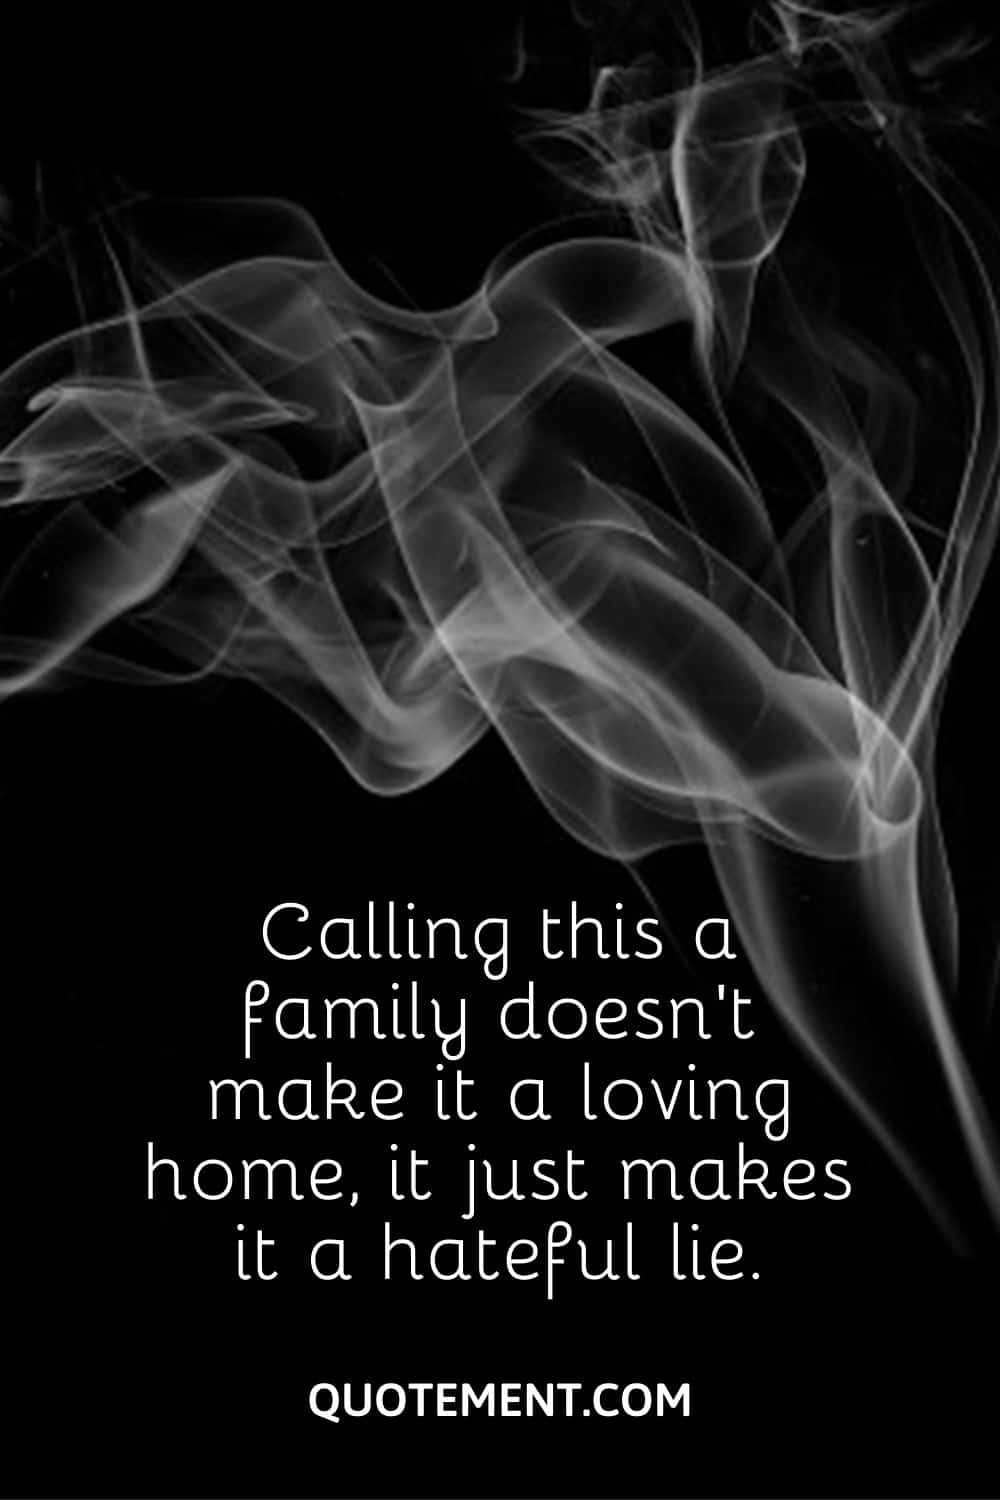 Calling this a family doesn’t make it a loving home, it just makes it a hateful lie